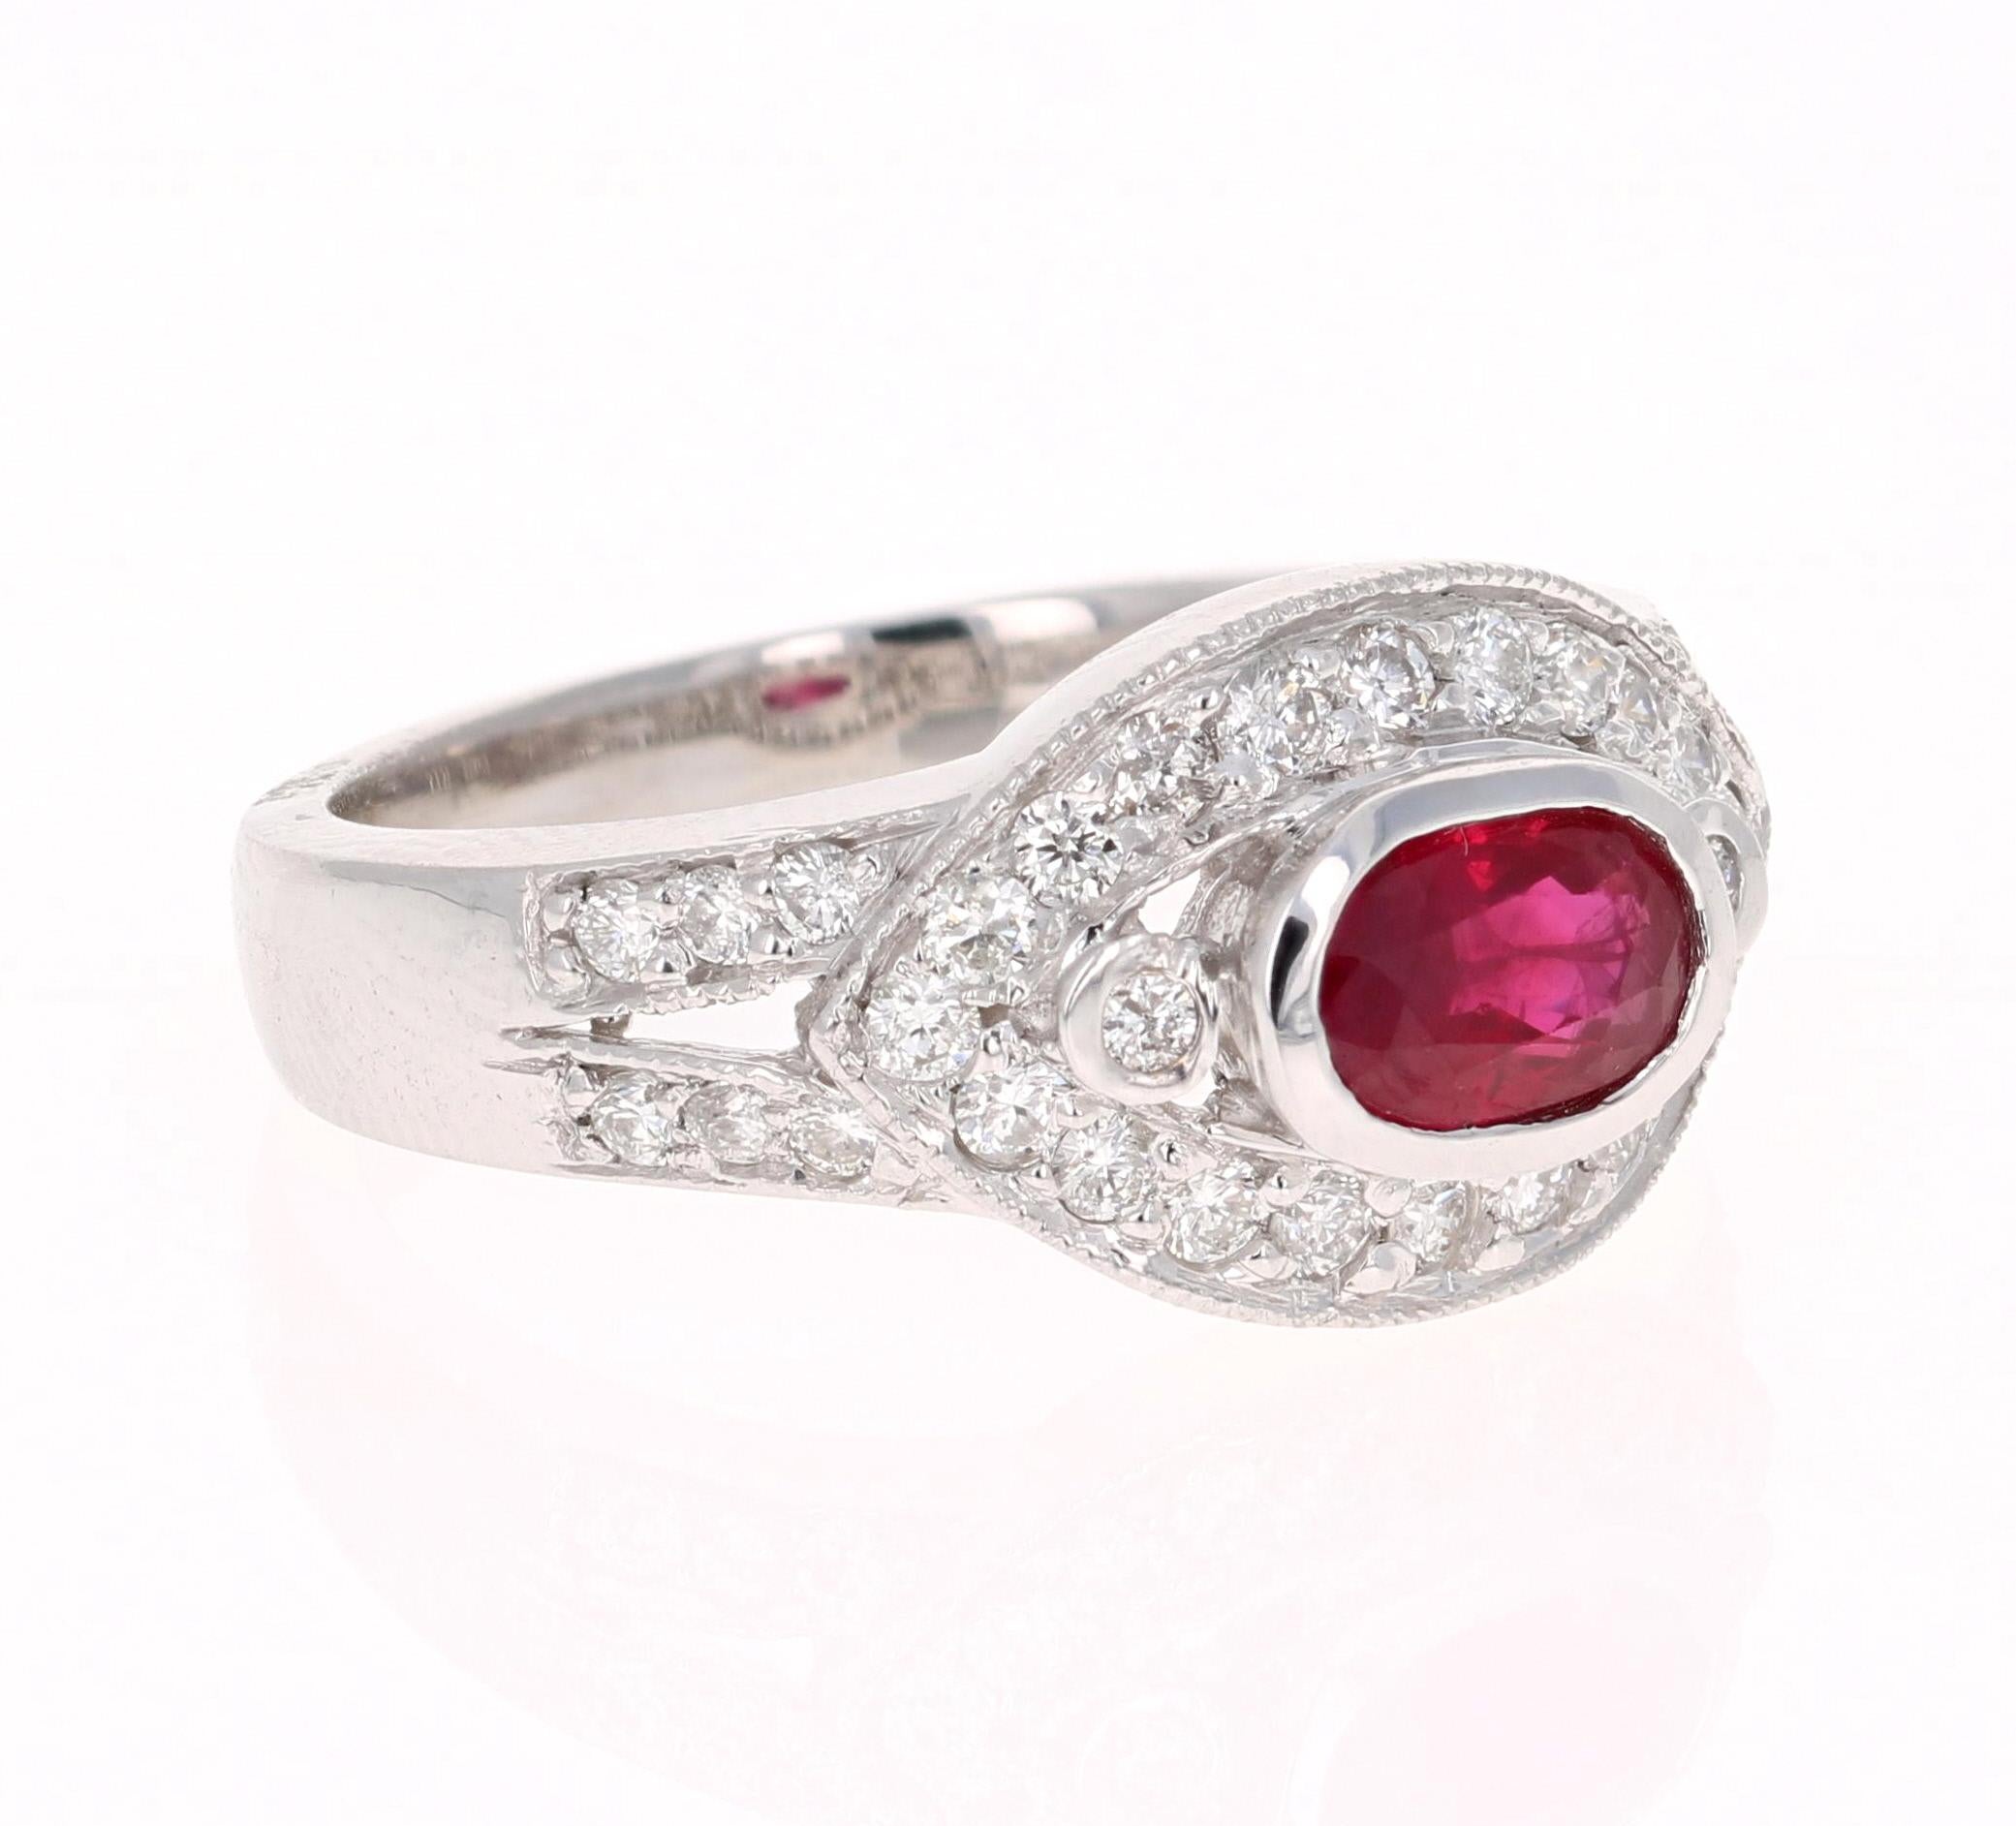 Simply beautiful Ruby Diamond Ring with a Oval Cut 0.92 Carat Burmese Ruby which is surrounded by 34 Round Cut Diamonds that weigh 0.59 carats. The total carat weight of the ring is 1.51 carats. The clarity and color of the diamonds are SI2-F. 

The